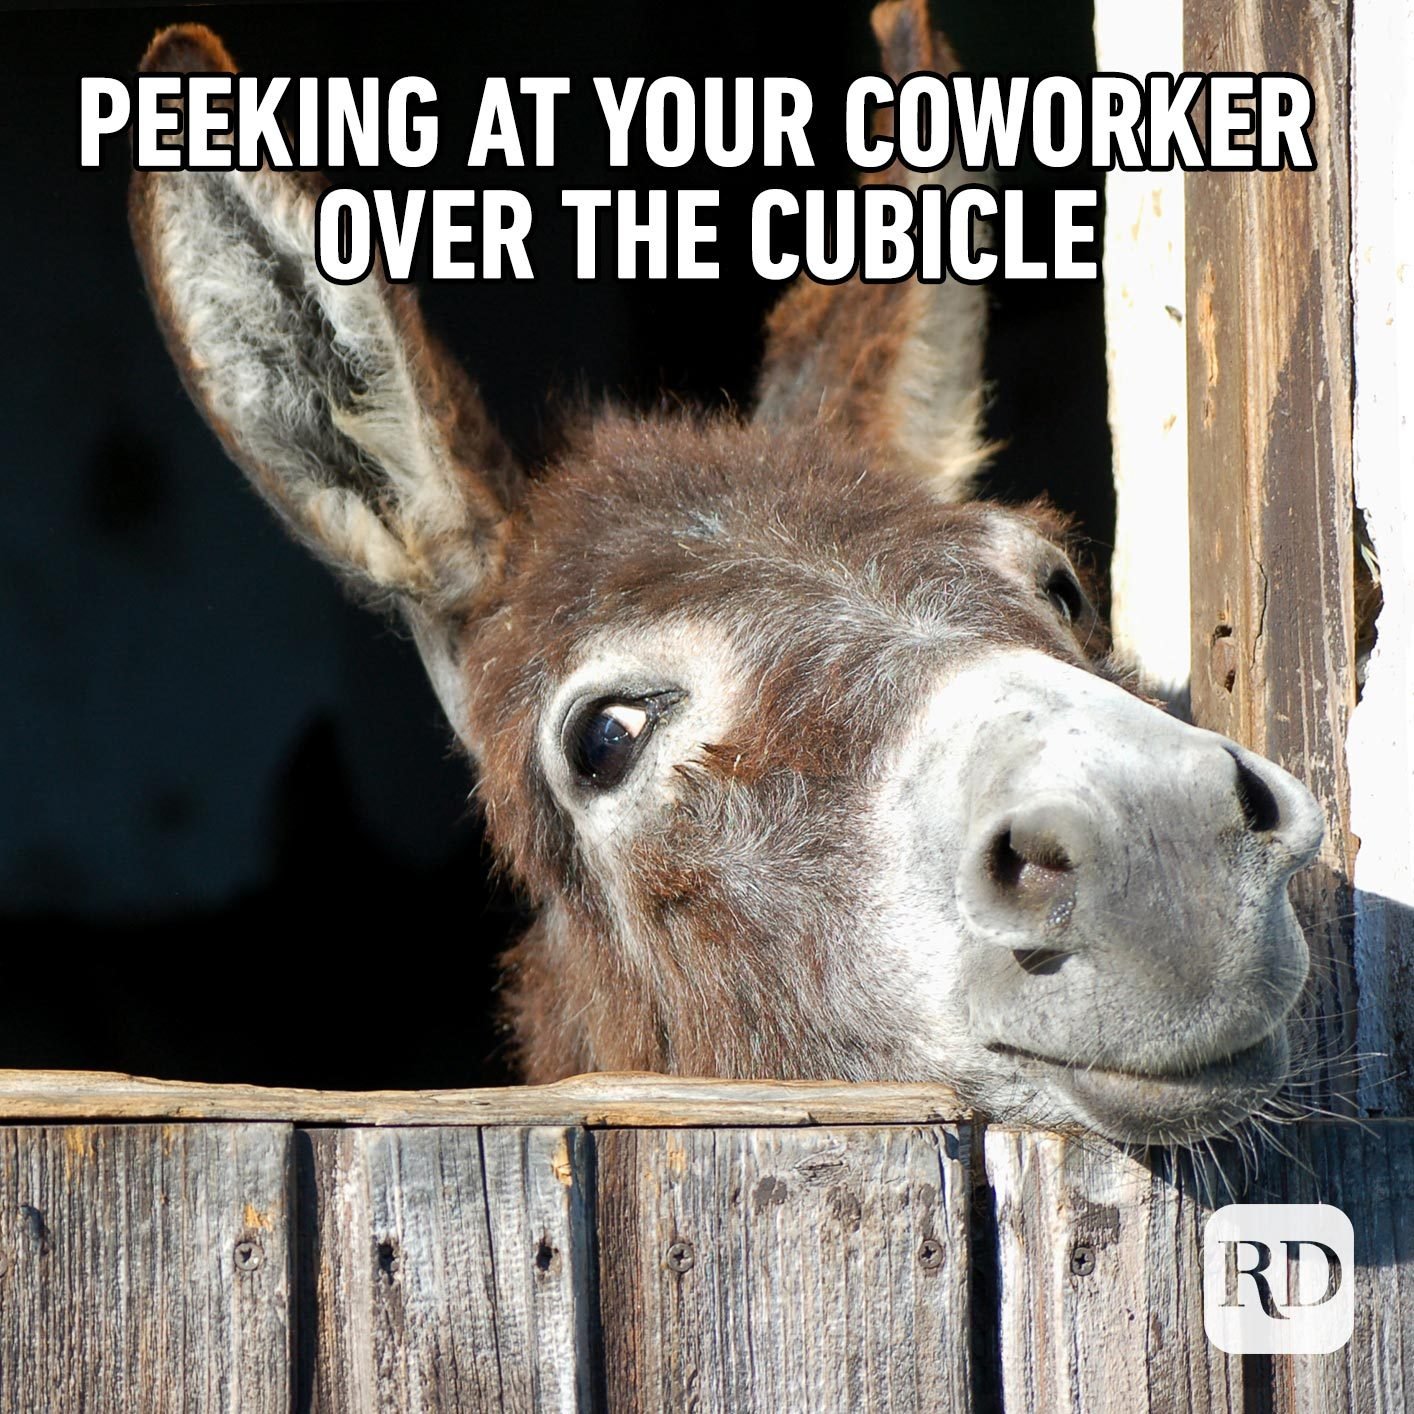 Donkey peeking out of stall. Meme text: Peeking as your coworker over the cubicle